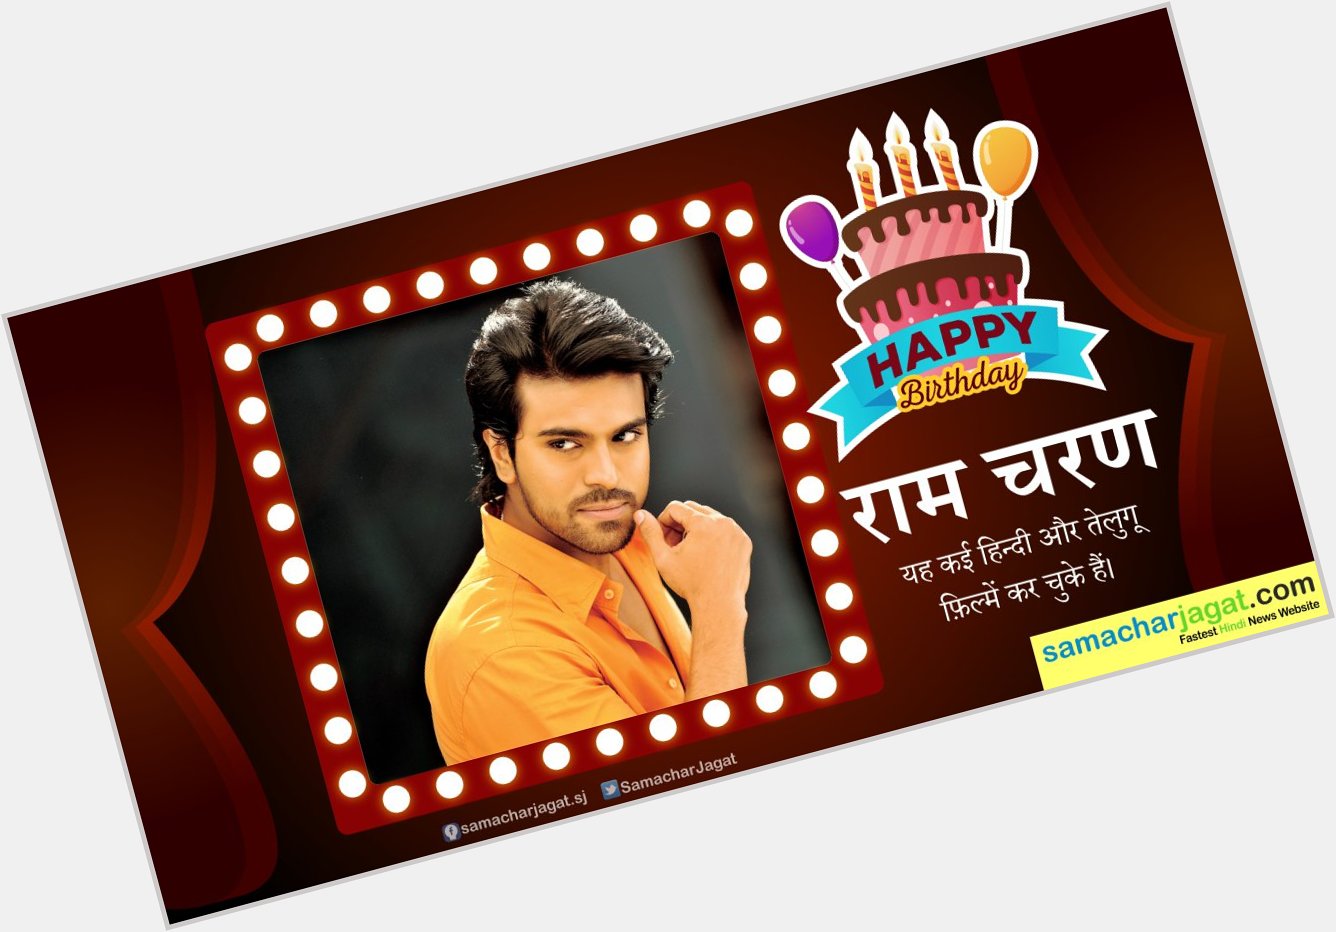 ~Wishing a Very Happy Birthday to South Indian Ram Charan~  